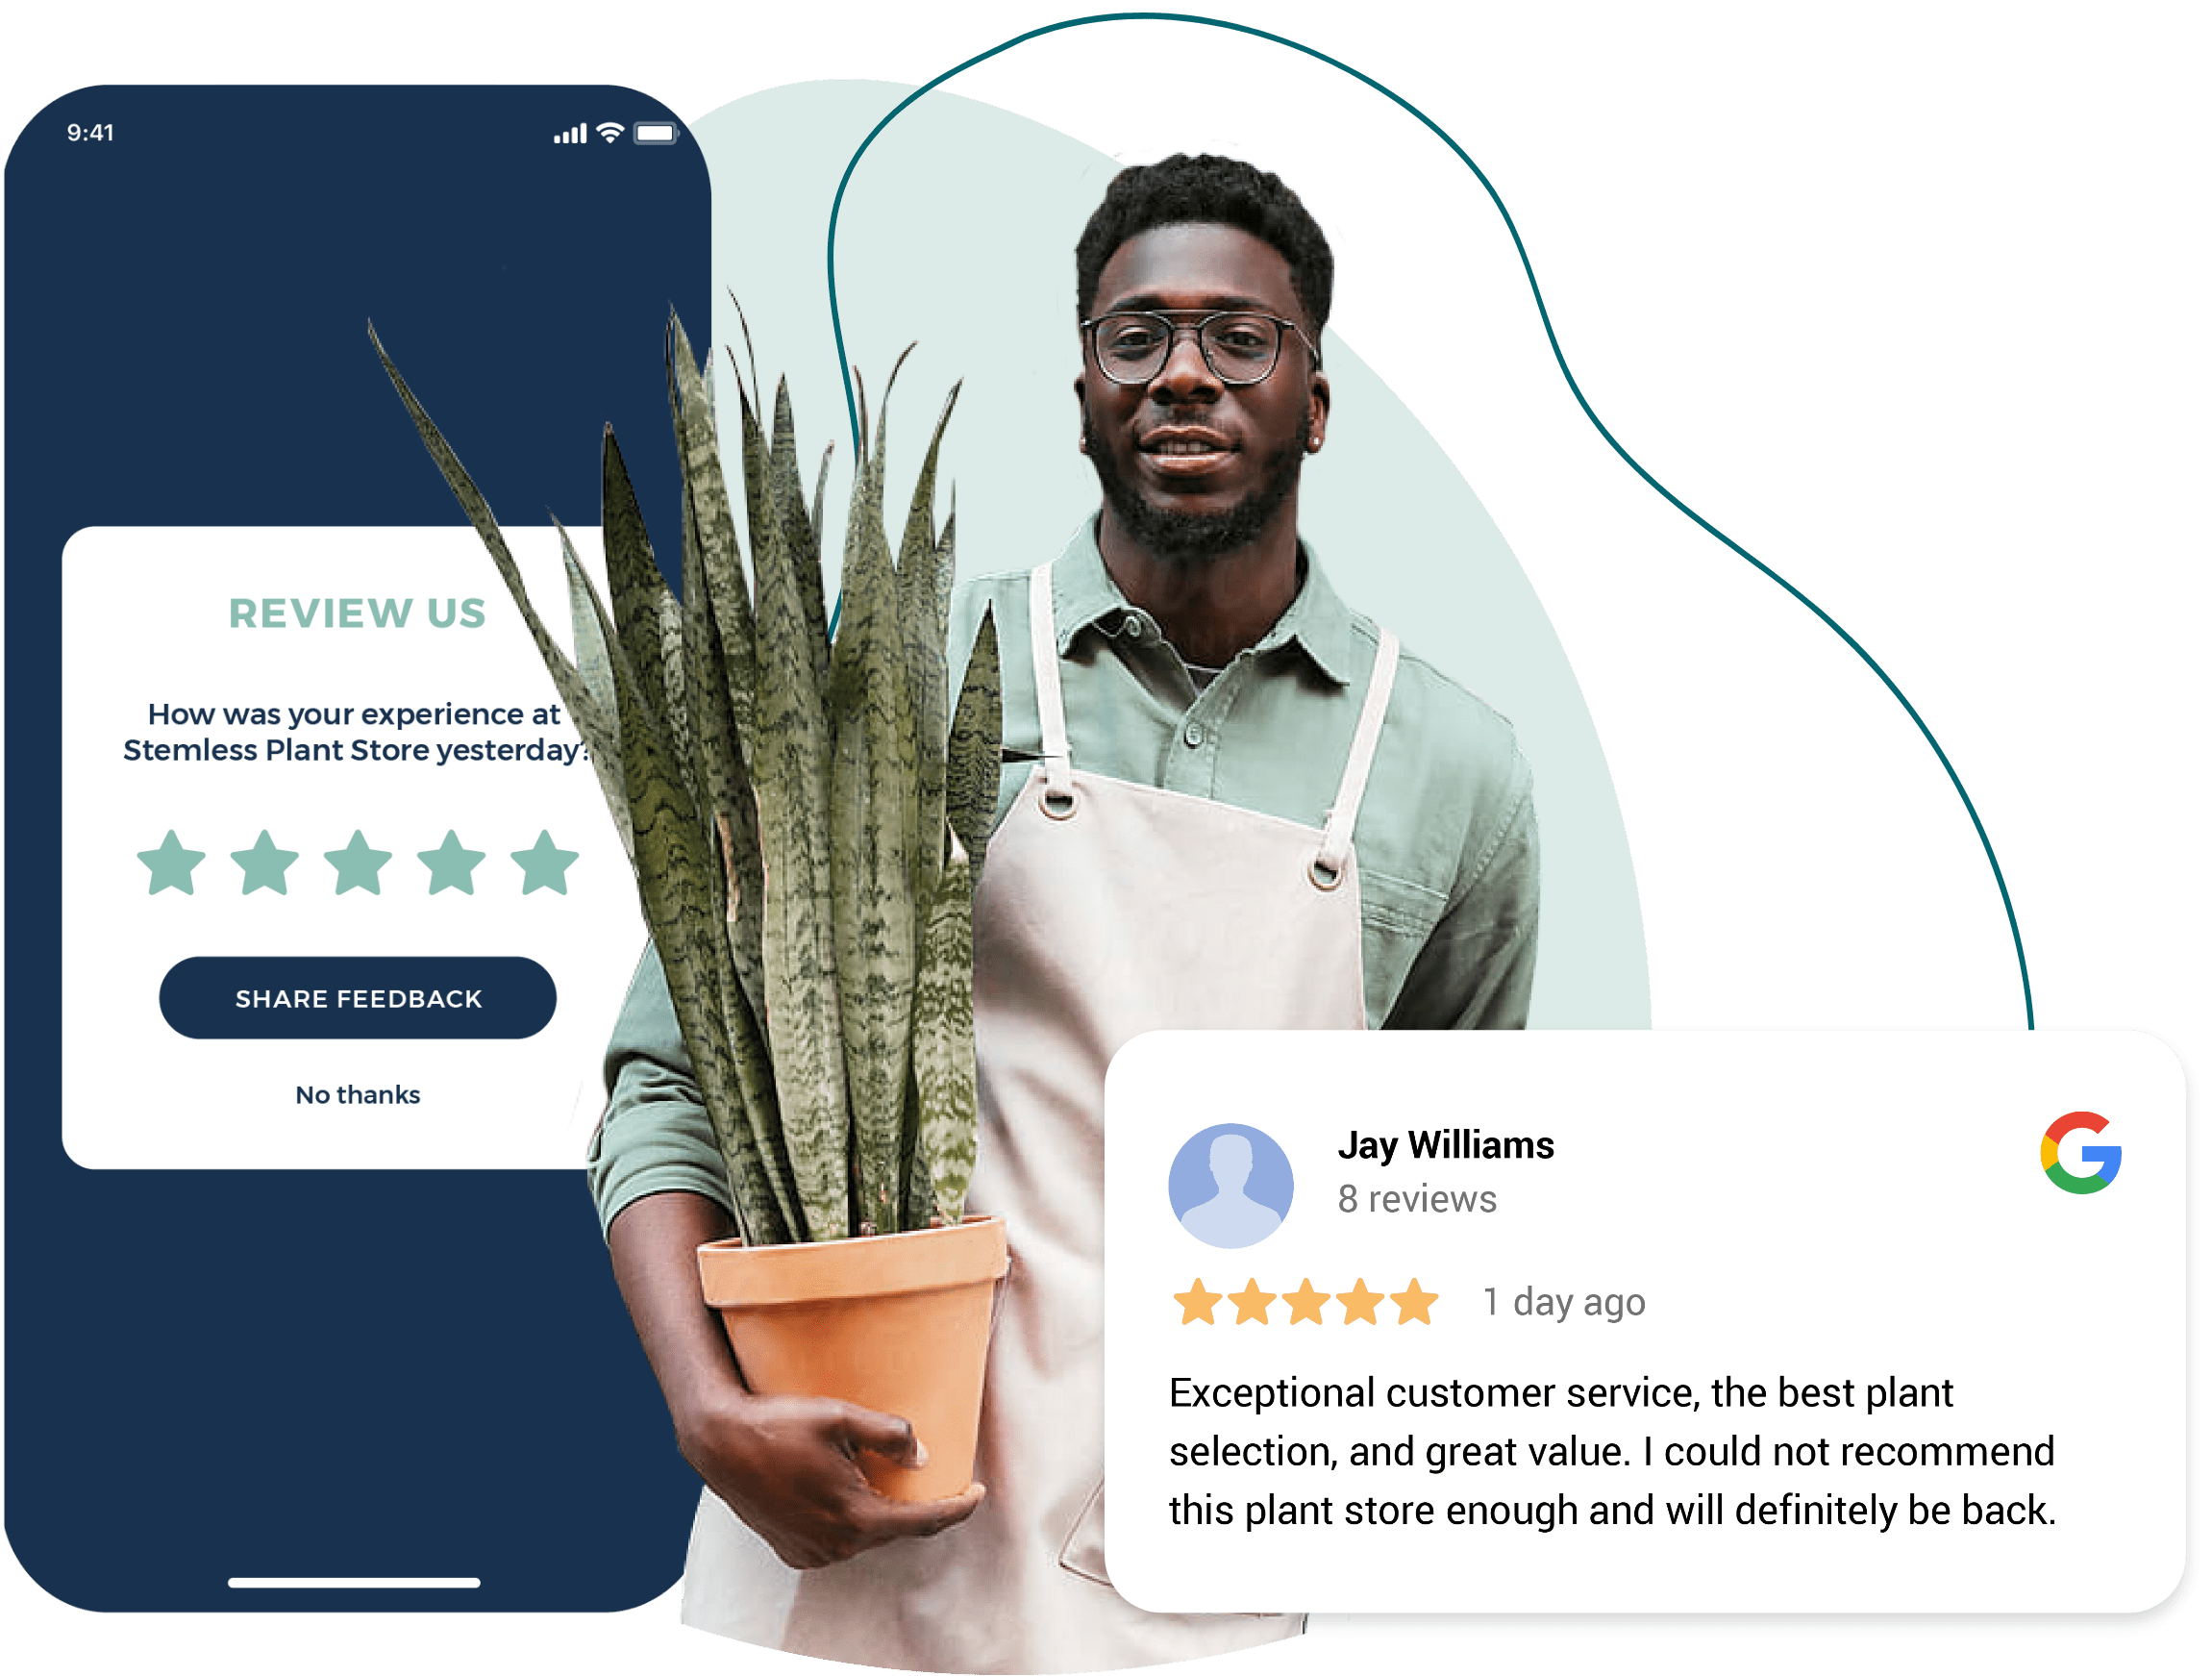 Get 5 star reviews and rave reviews on google and yelp by automating customer feedback with Stemless